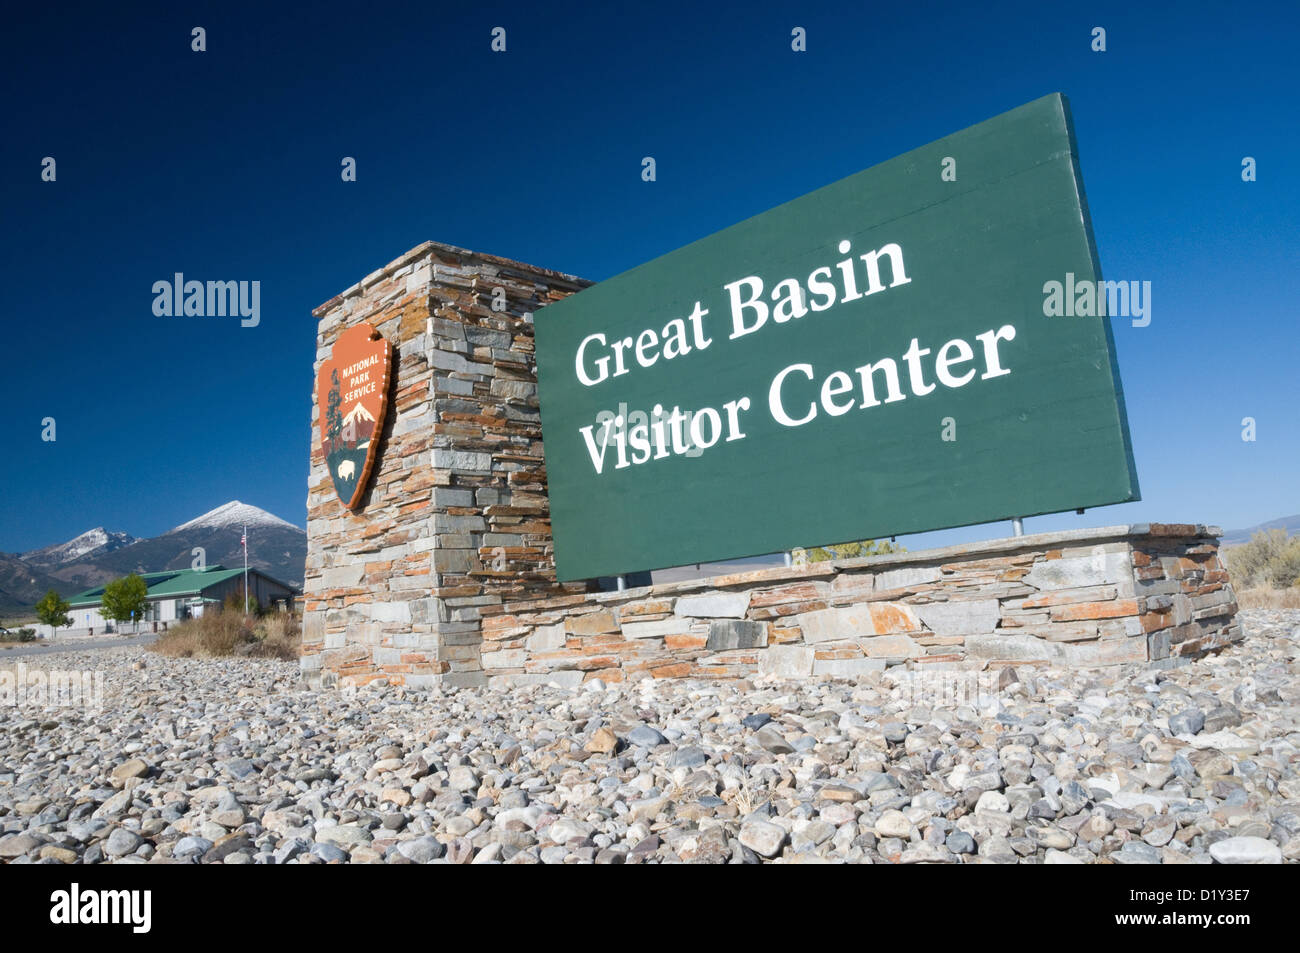 The Great Basin Visitor Center in Great Basin National Park, Nevada. Stock Photo